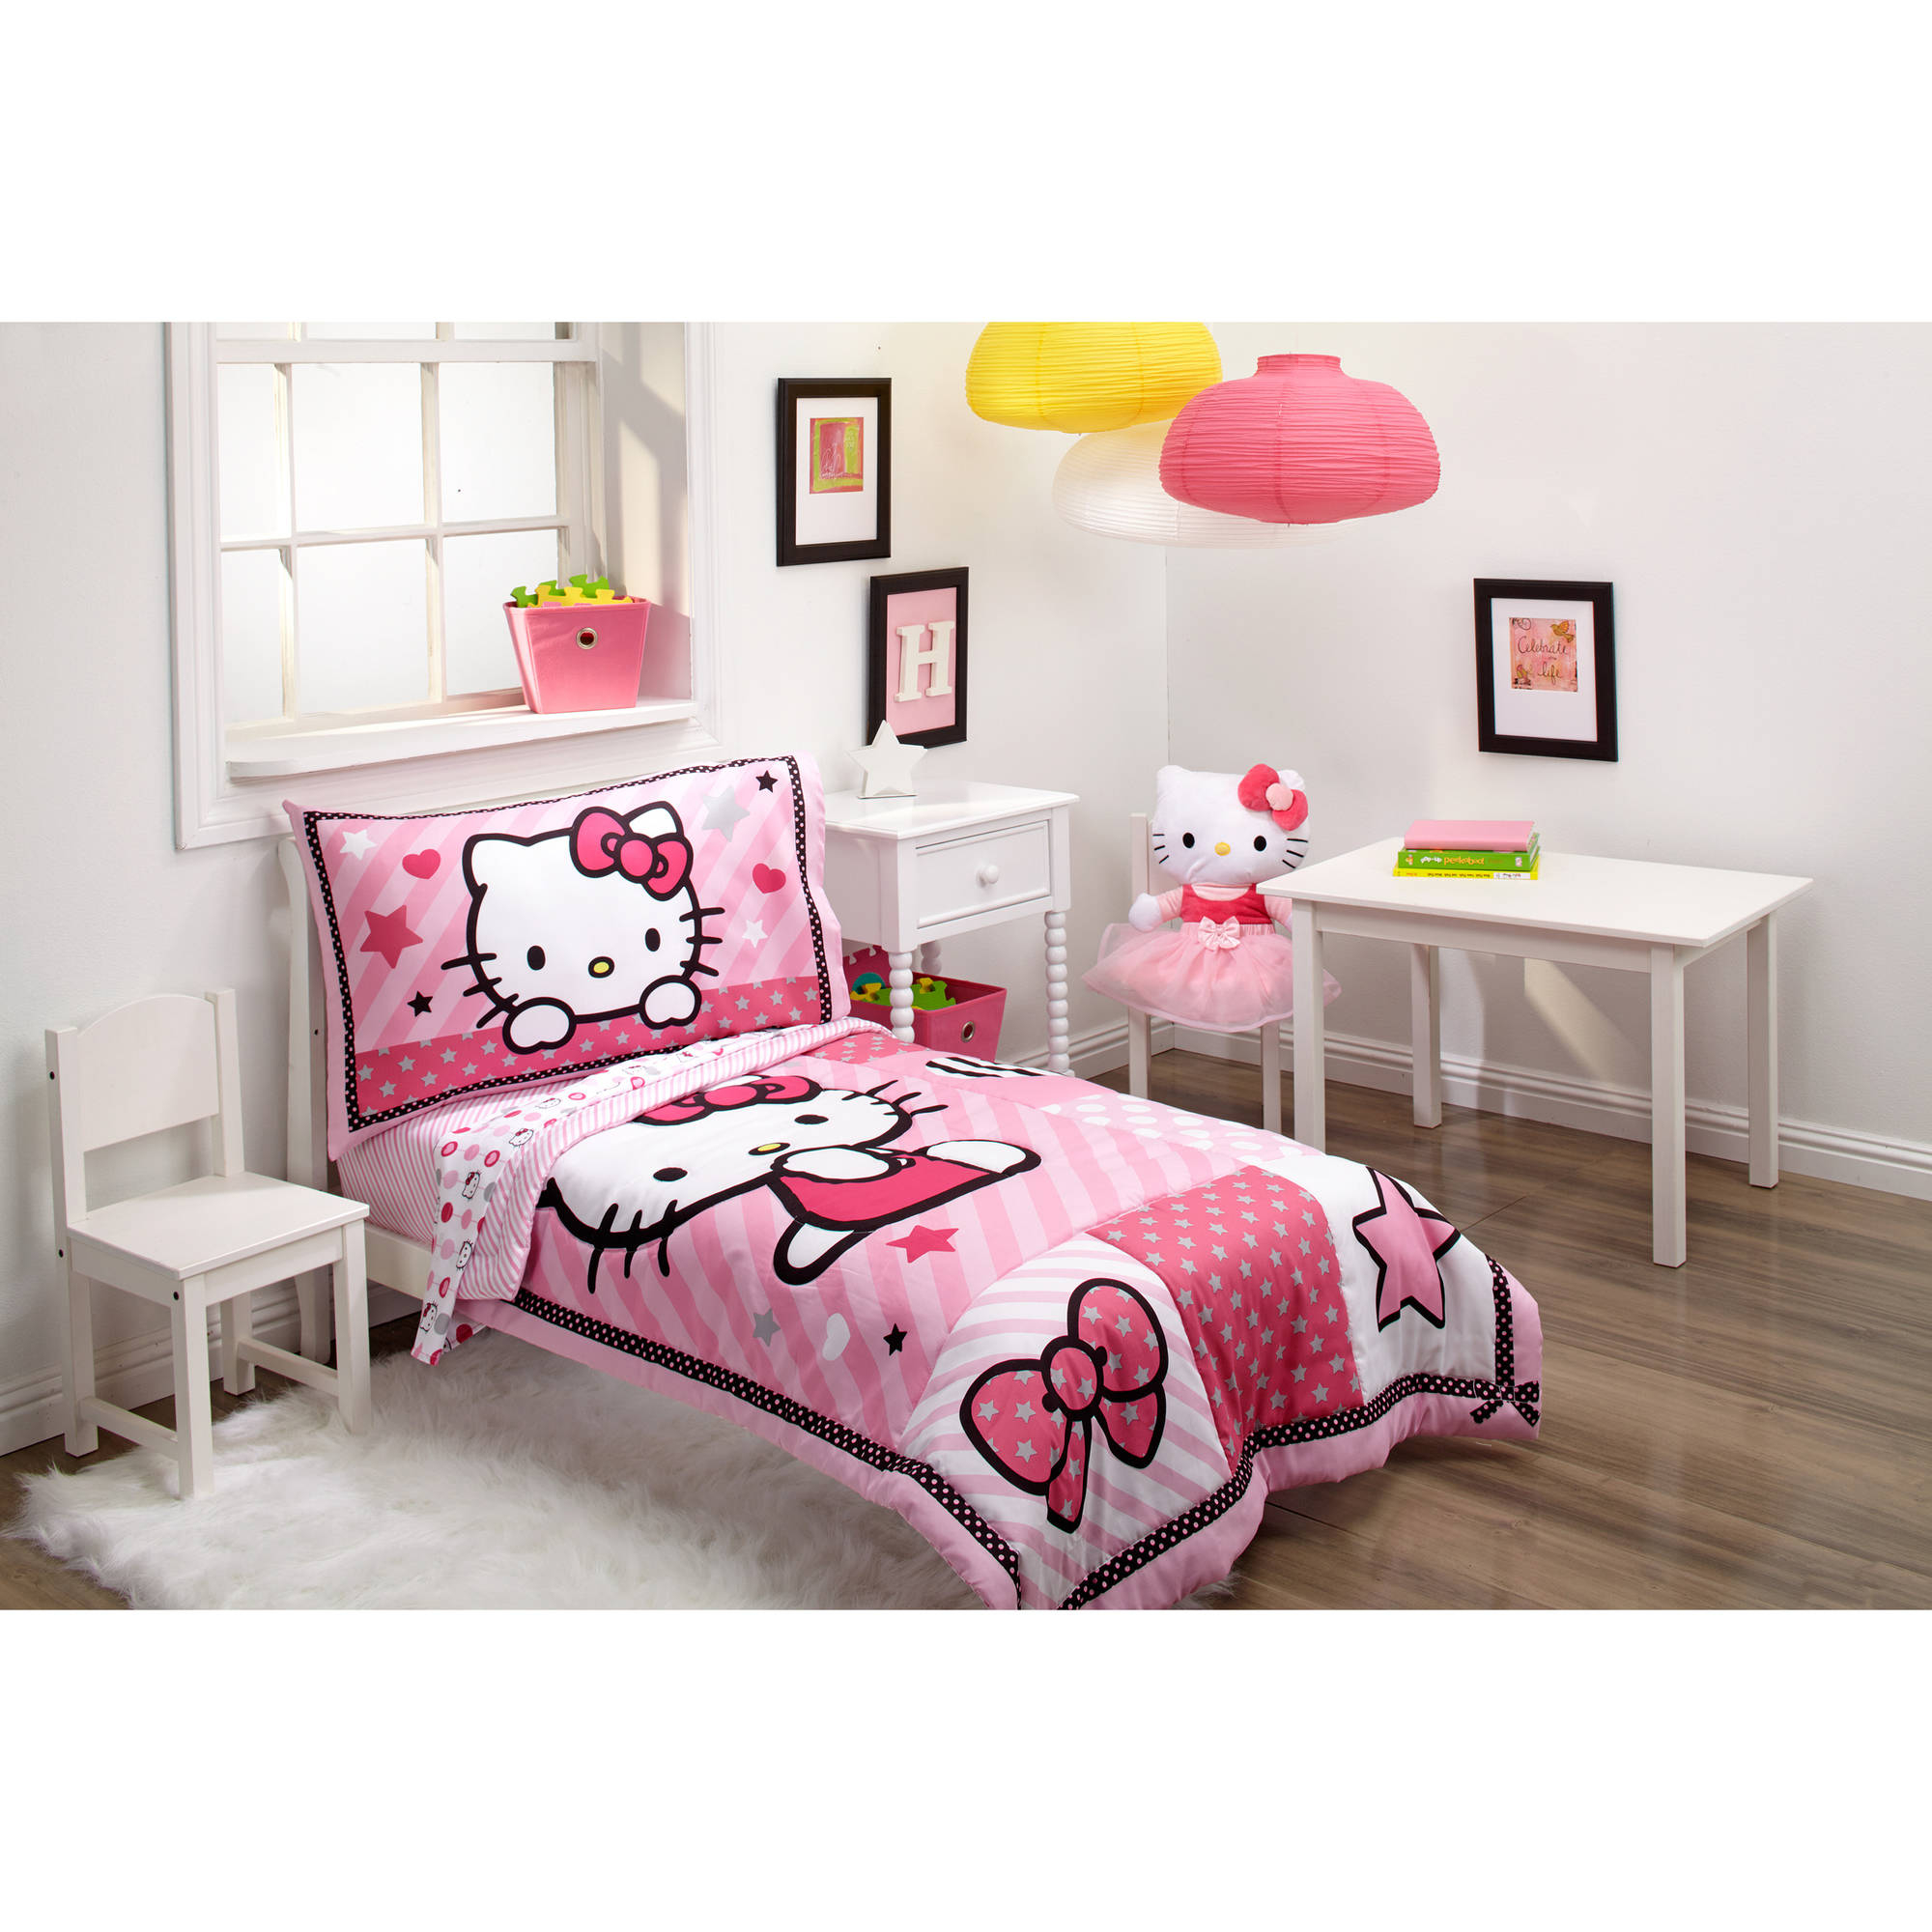 Hello Kitty Sweetheart 3 Piece Toddler Bedding Set With Bonus Matching Pillow Case intended for proportions 2000 X 2000